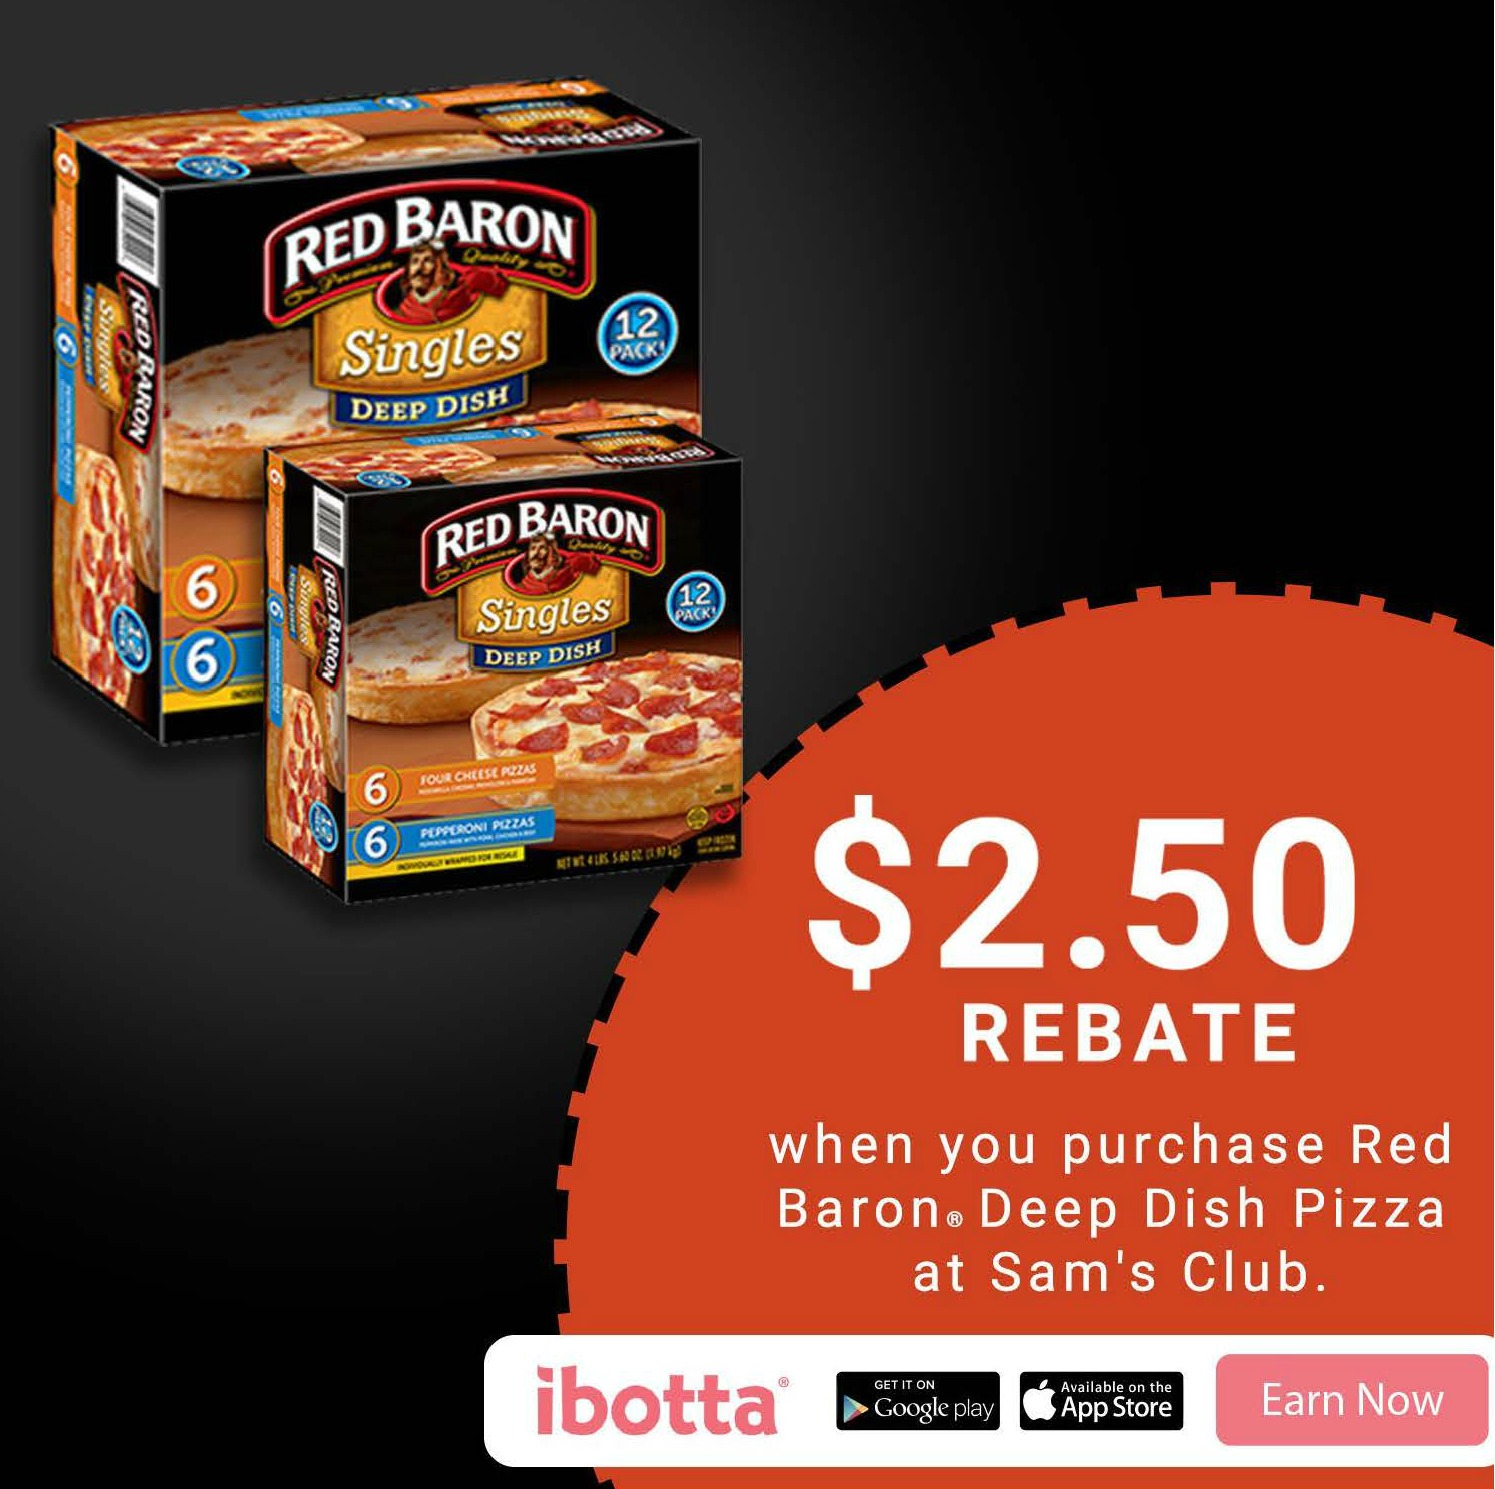 Red Baron Pizza at Sam’s Club offer, check it out!